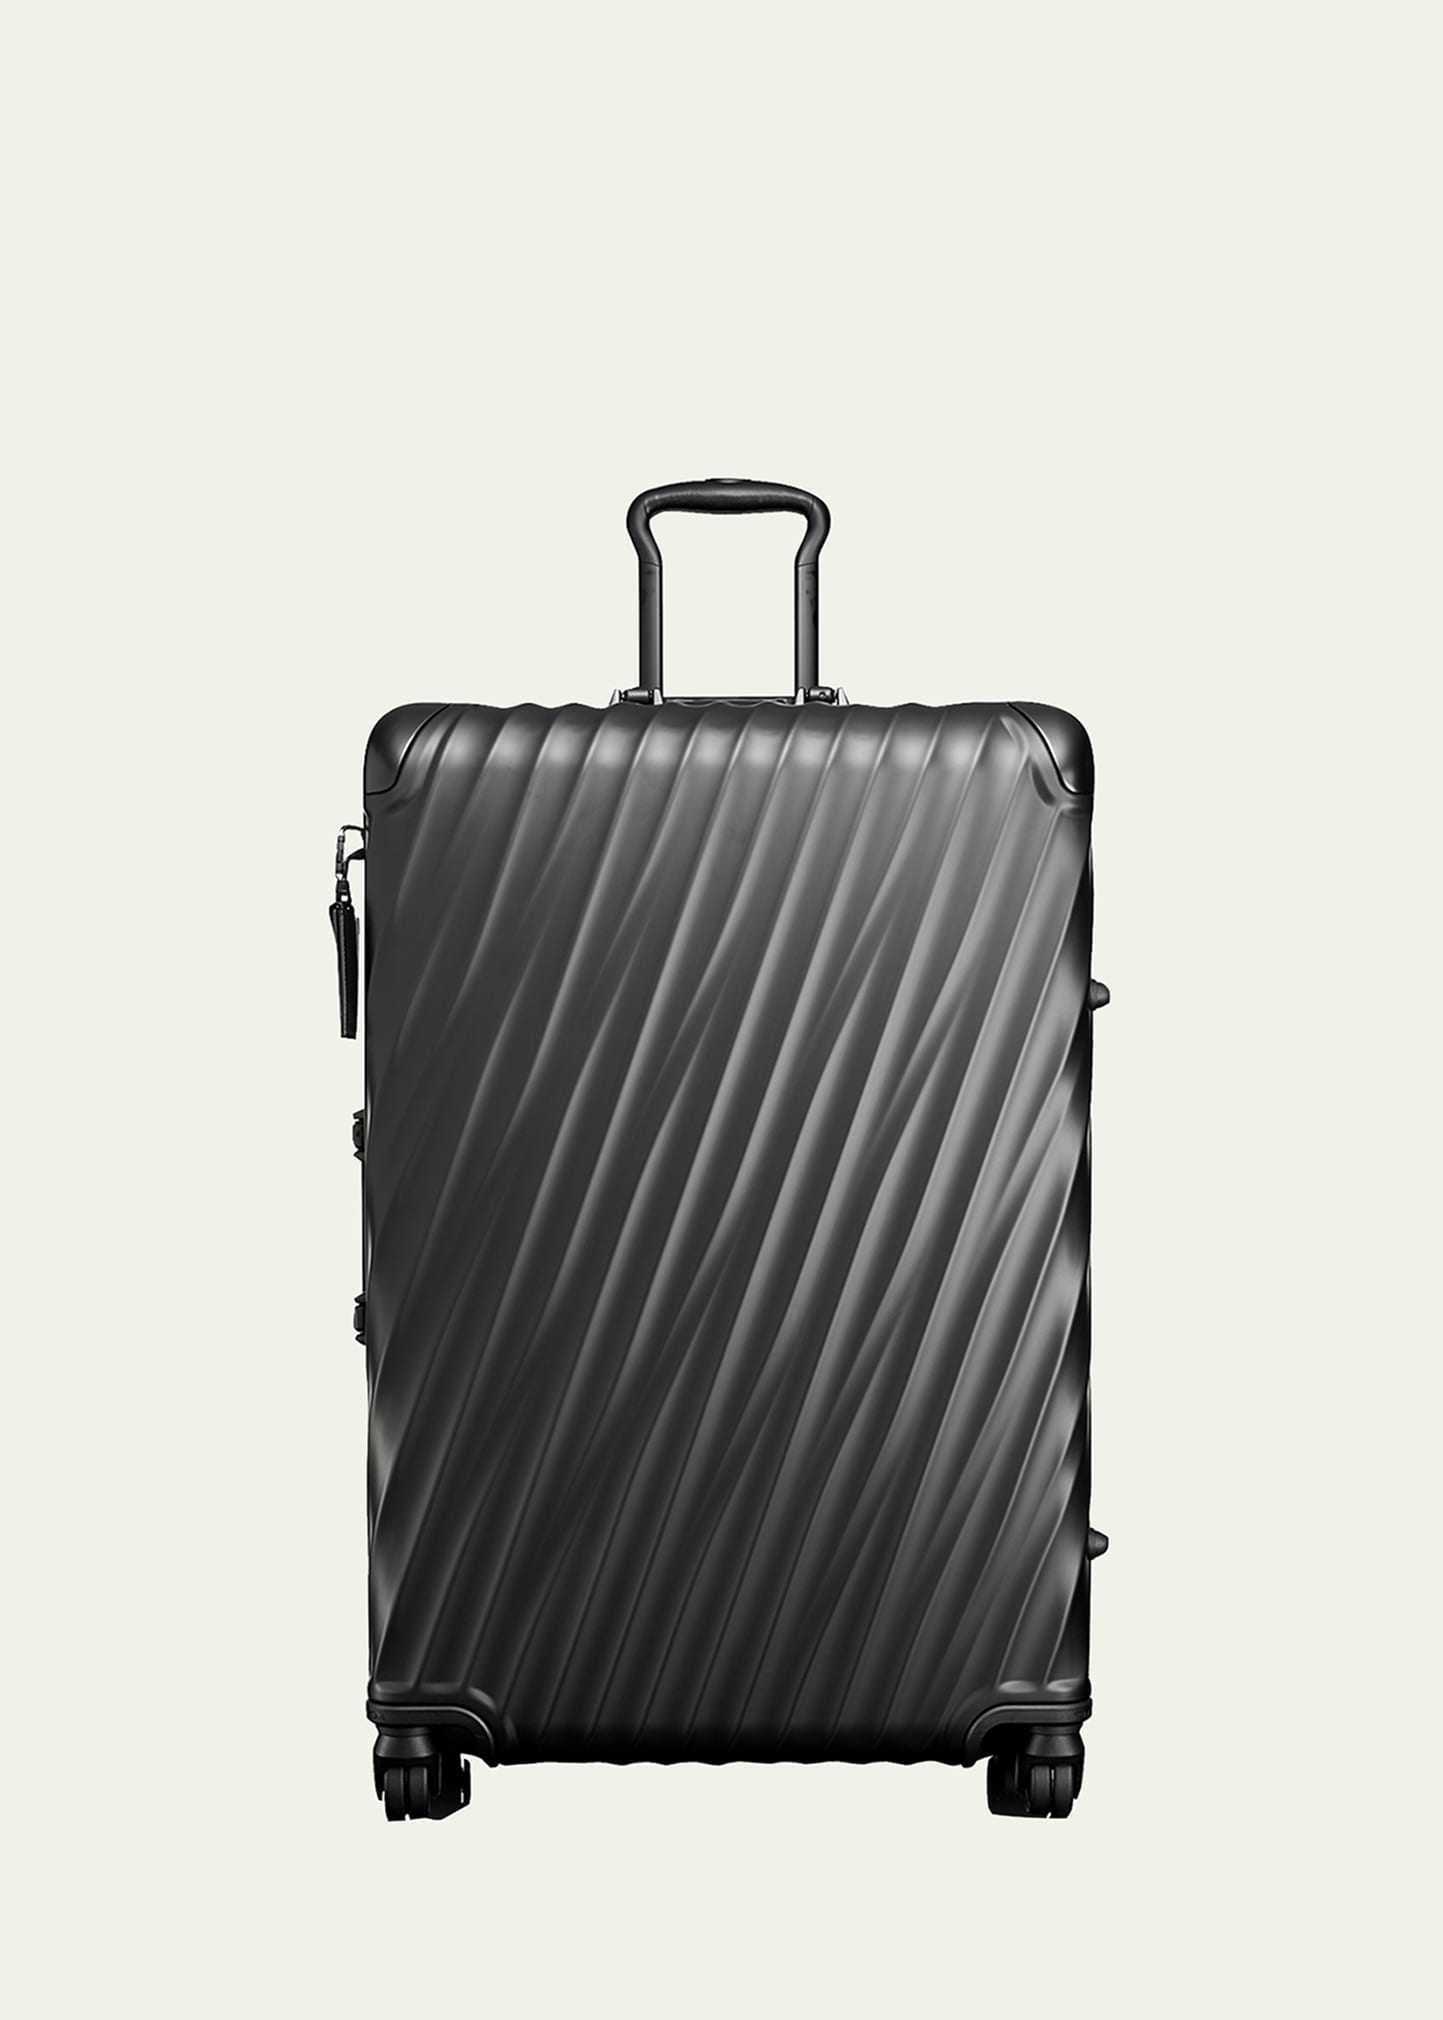 Tumi Extended Trip Packing Luggage In Black